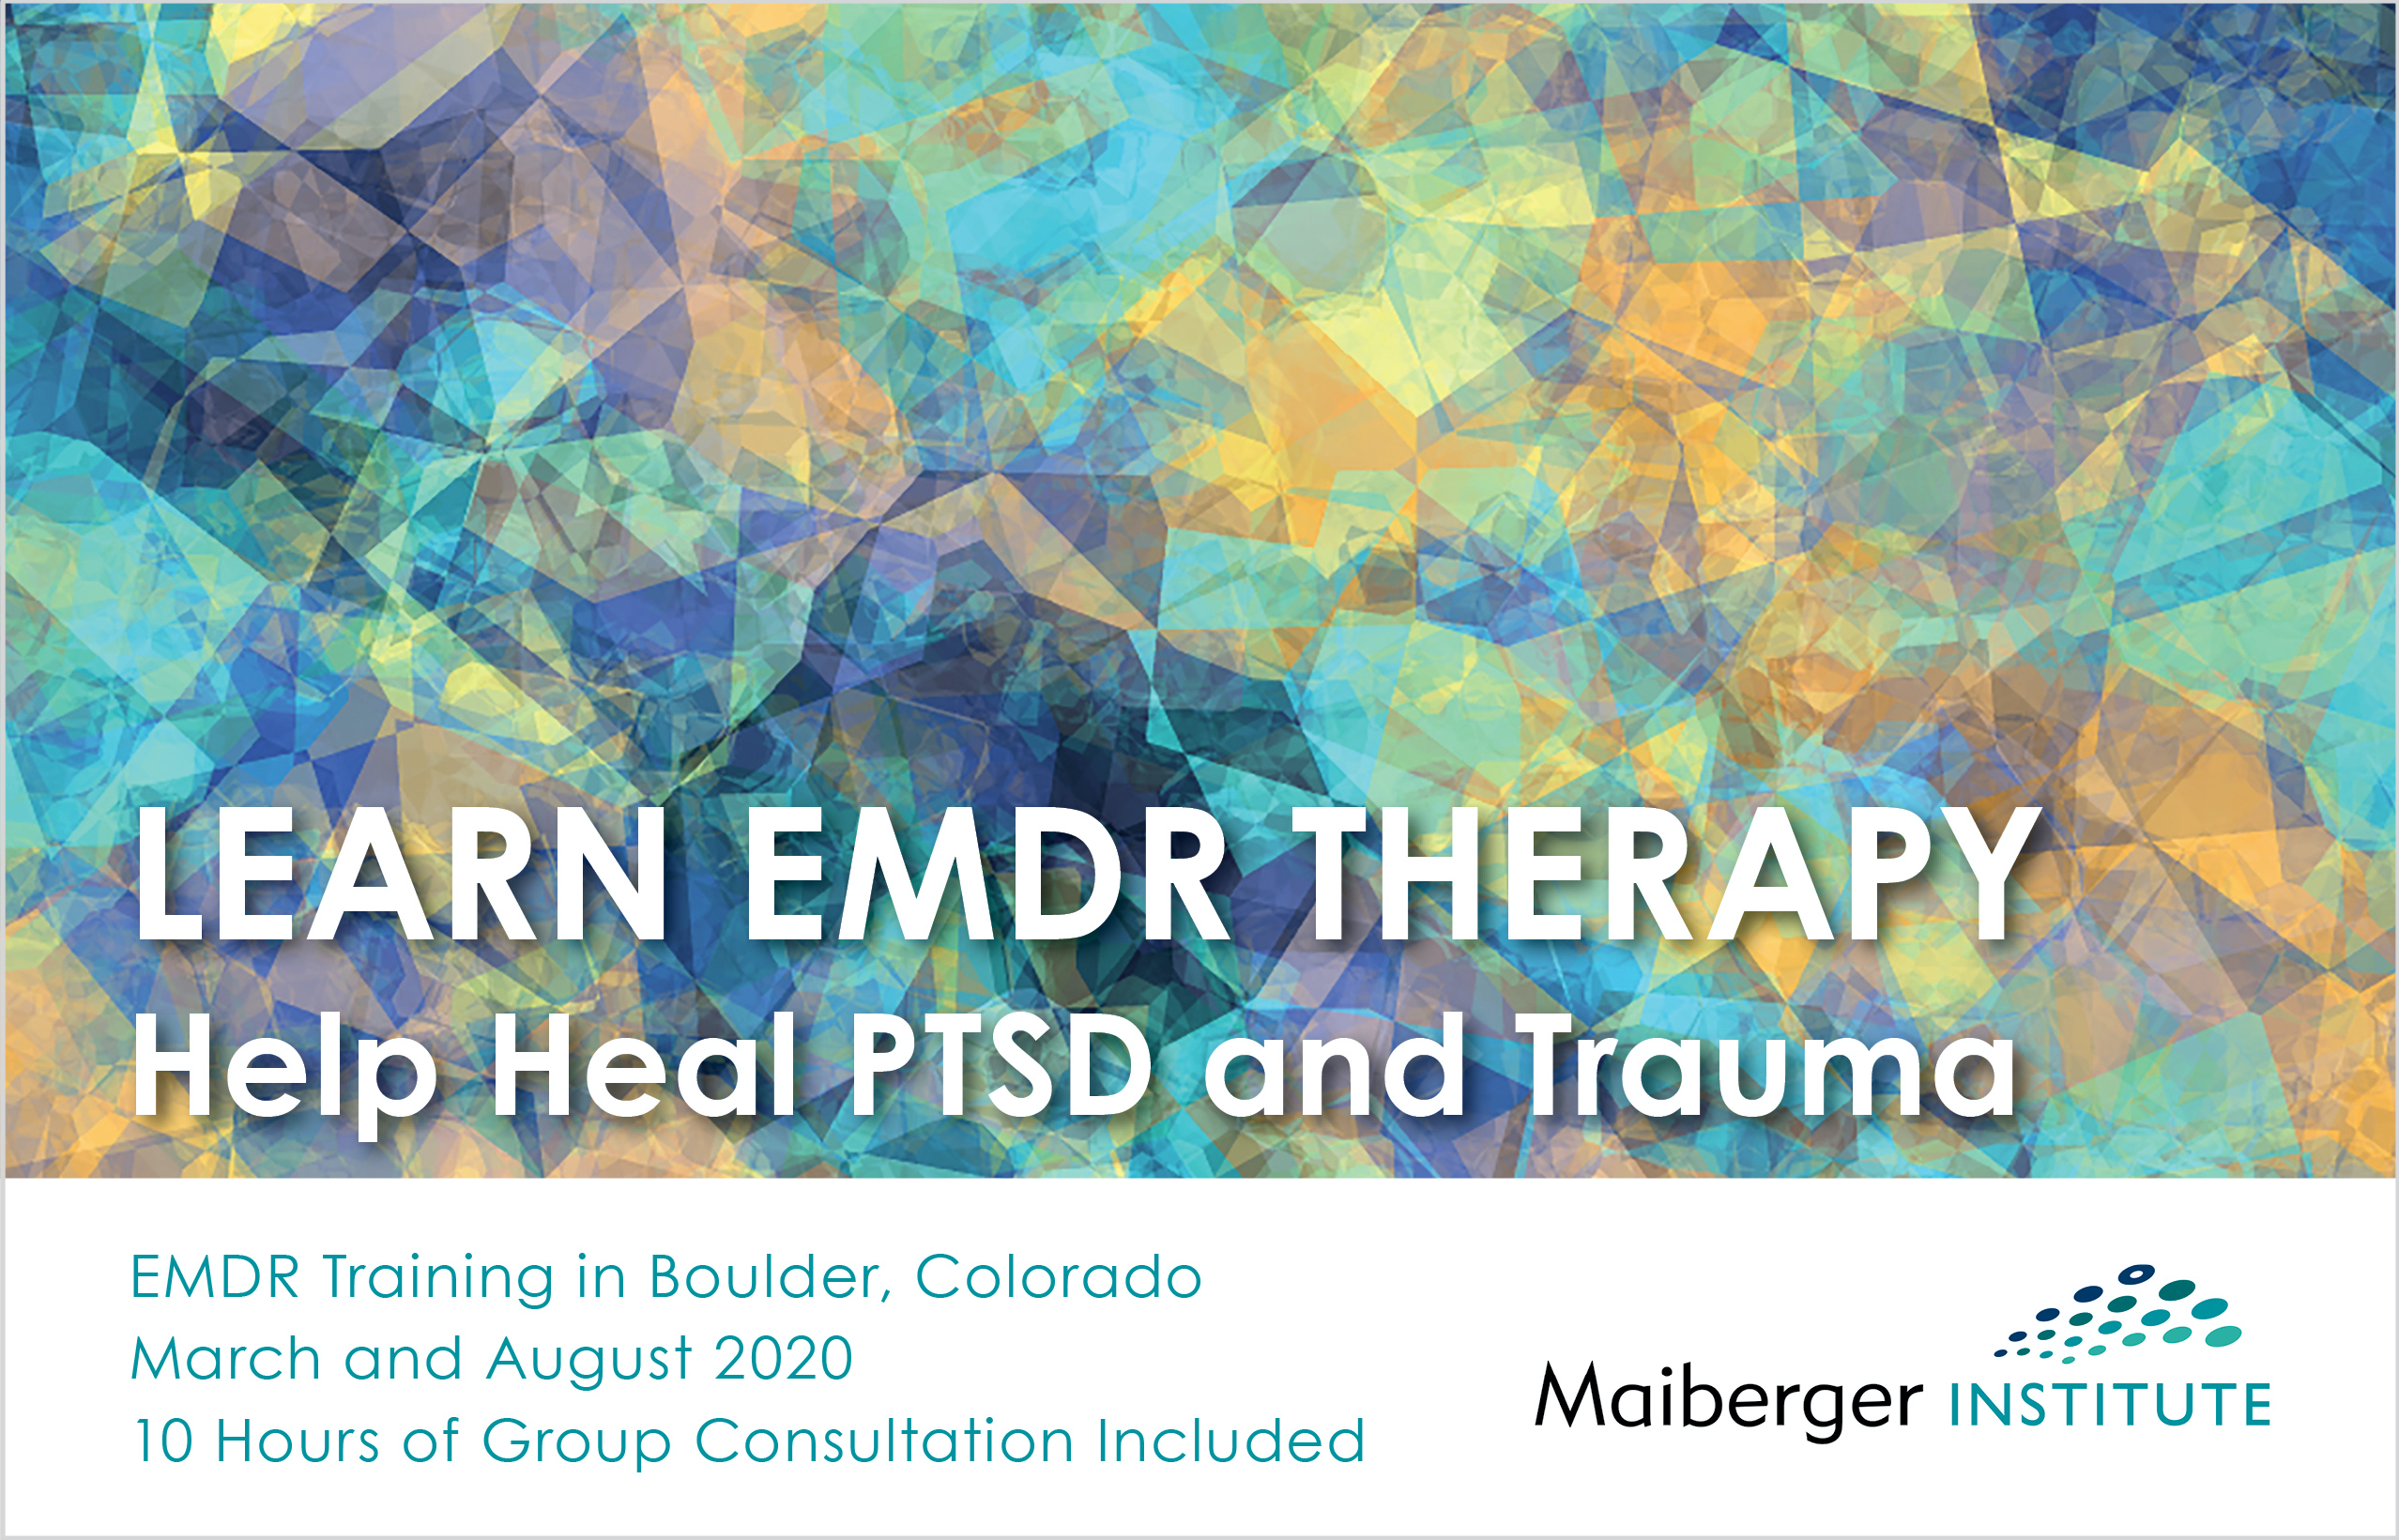 EMDR Training in Boulder Colorado - March and August 2020 - Maiberger Institute - Events